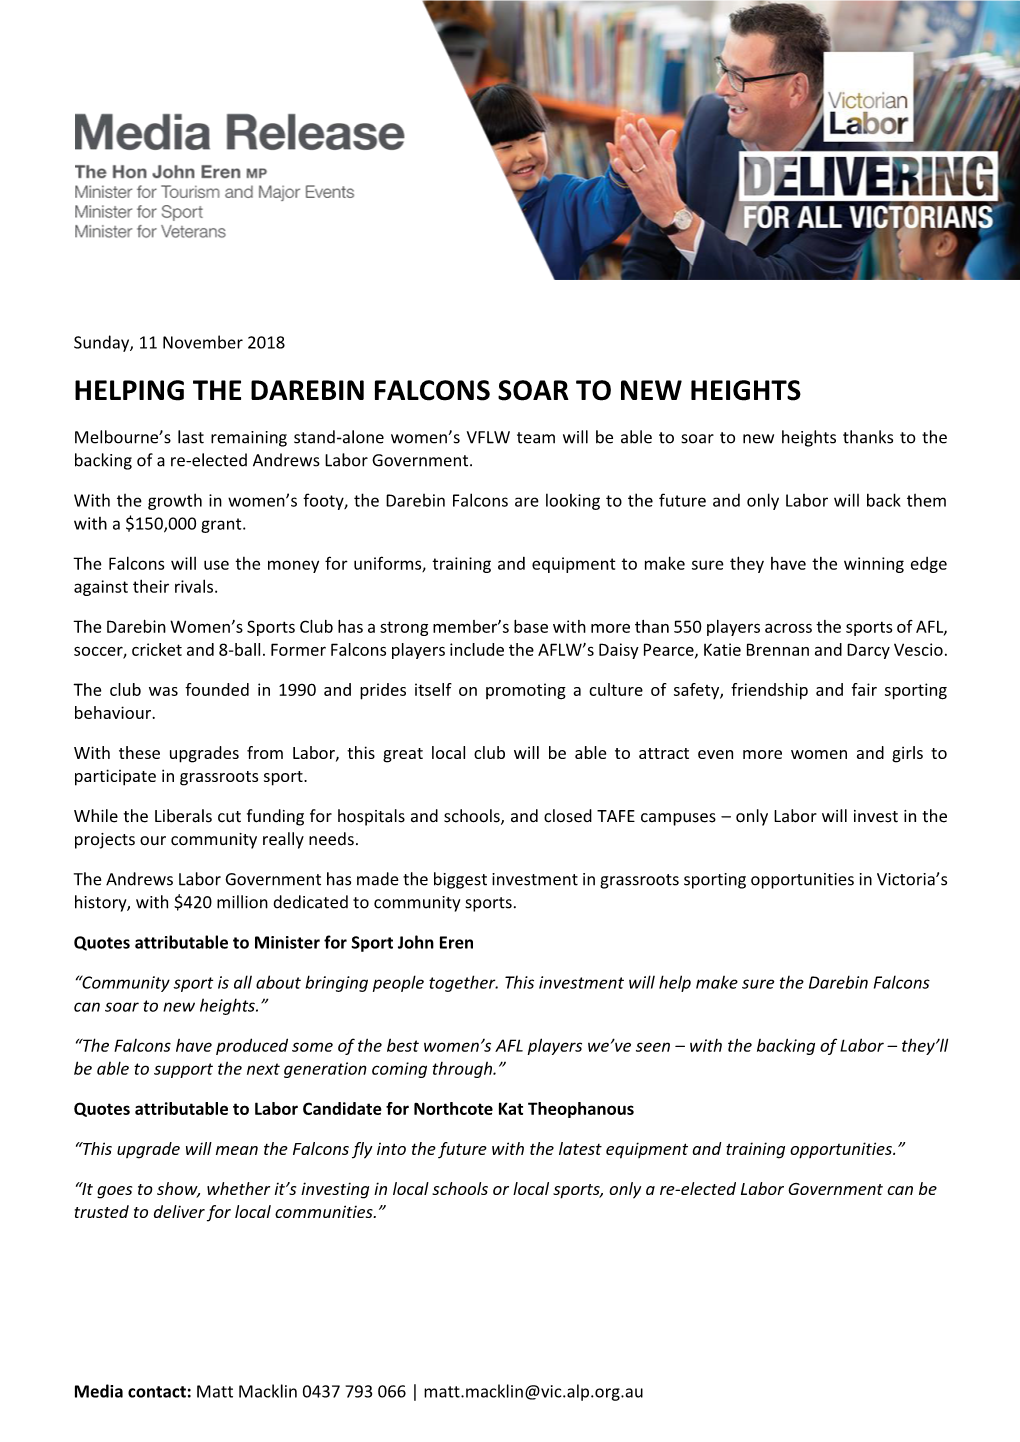 Helping the Darebin Falcons Soar to New Heights